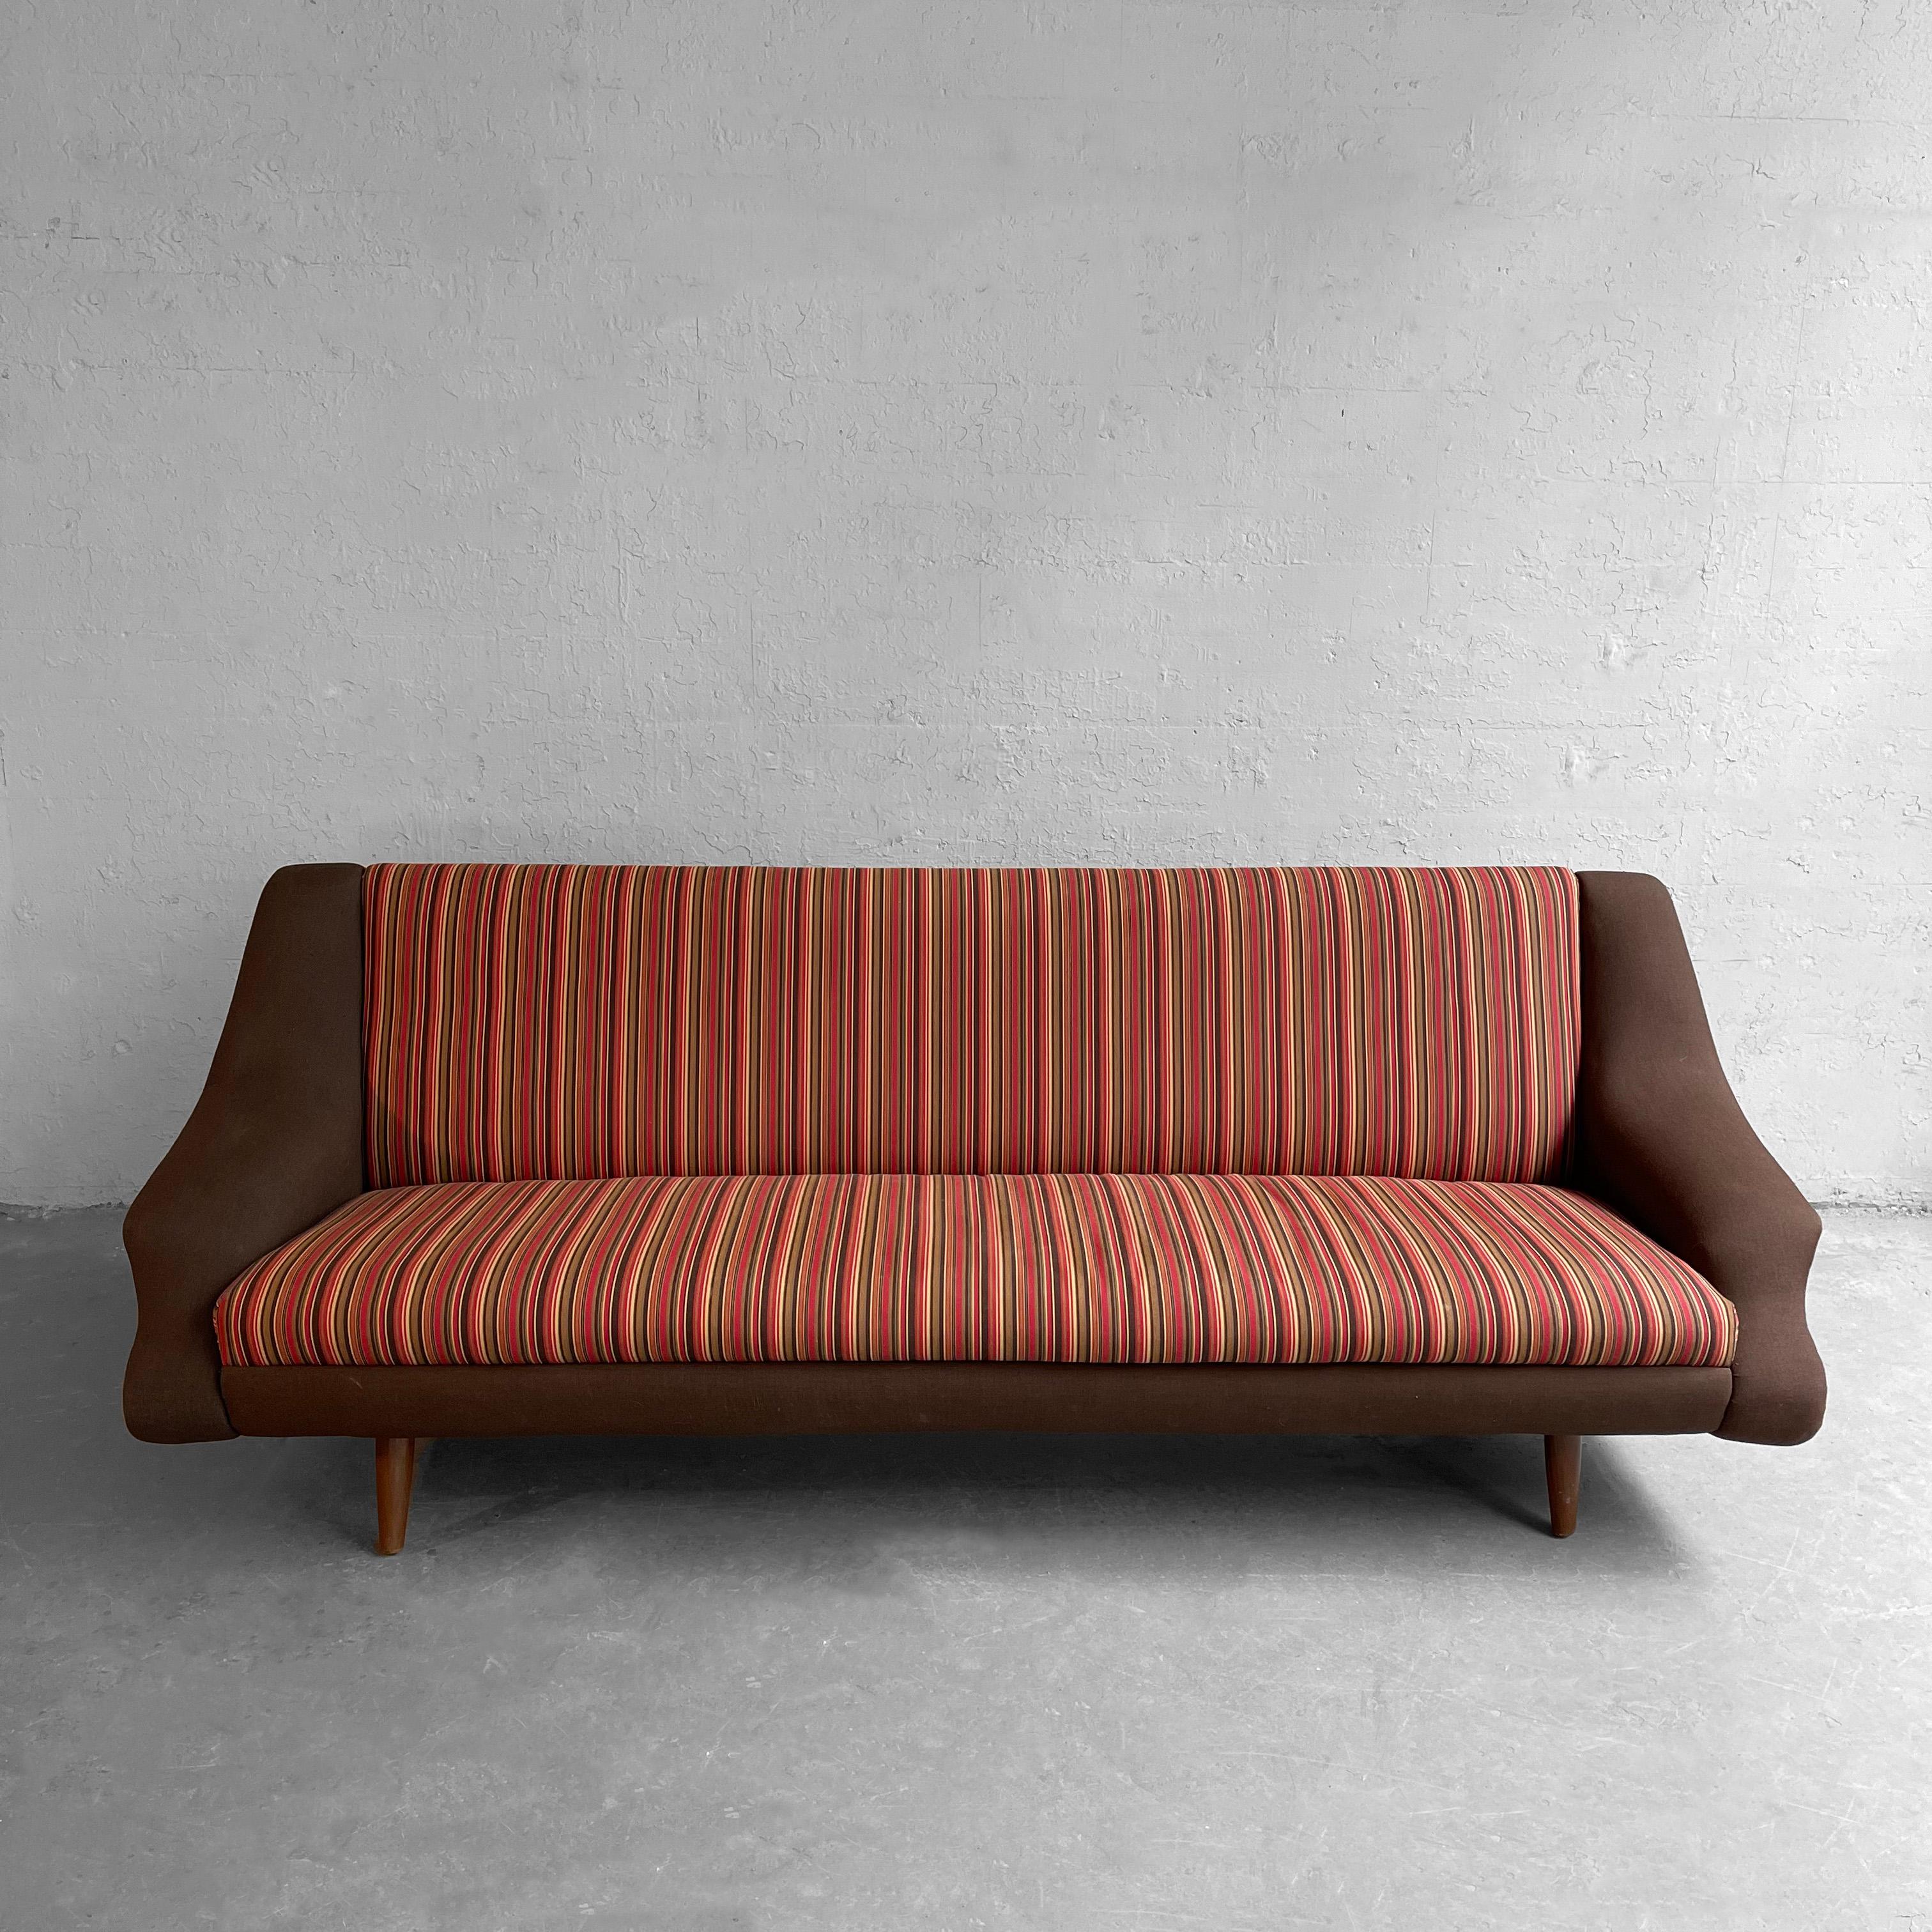 Italian Mid-Century Modern Sofa In The Style Of Marco Zanuso In Good Condition For Sale In Brooklyn, NY